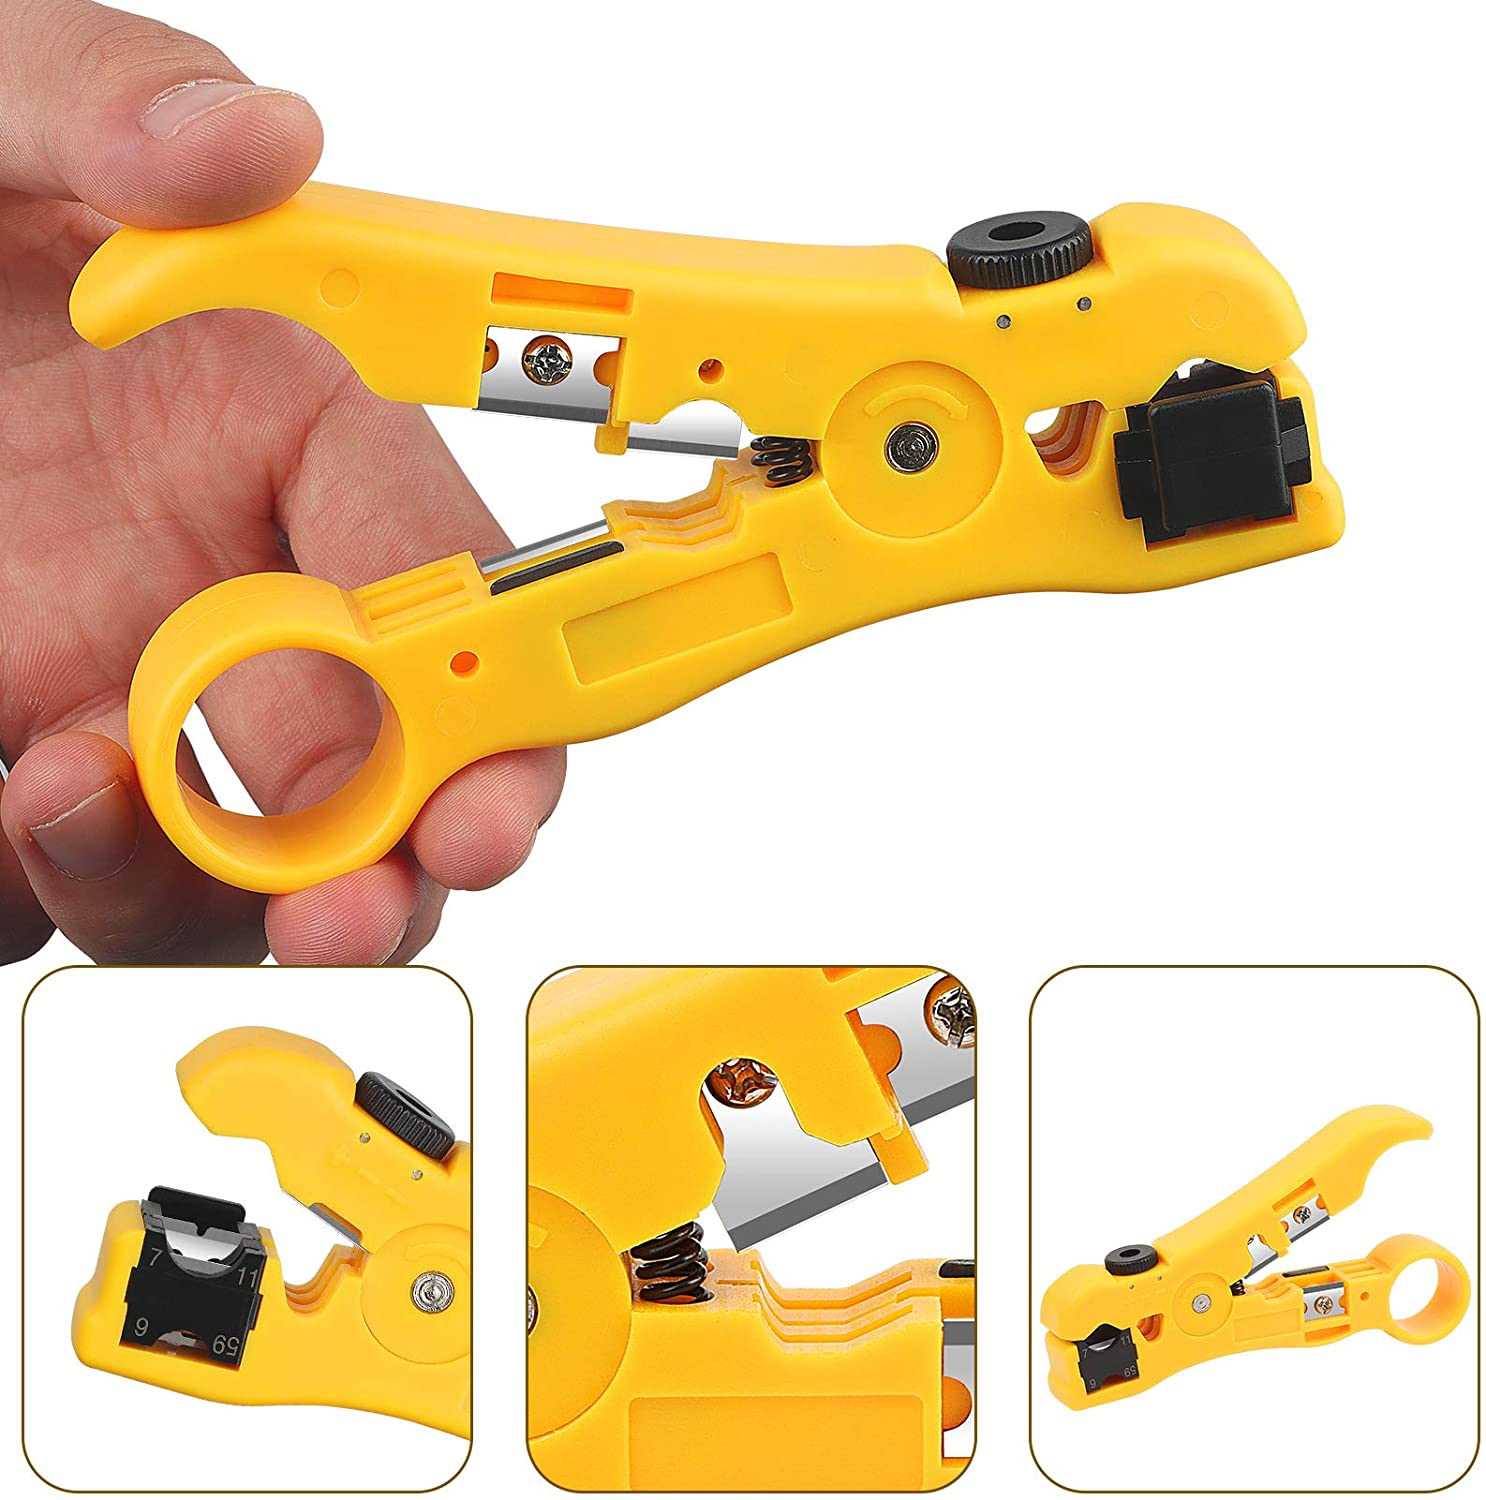 Ekavir Universal Wire Cable Cutter Stripper Tool for Coax Cable RG59 RG6 RG7/RG11 Round Network Cable CAT5 CAT6 and Flat Telephone Cable Yellow